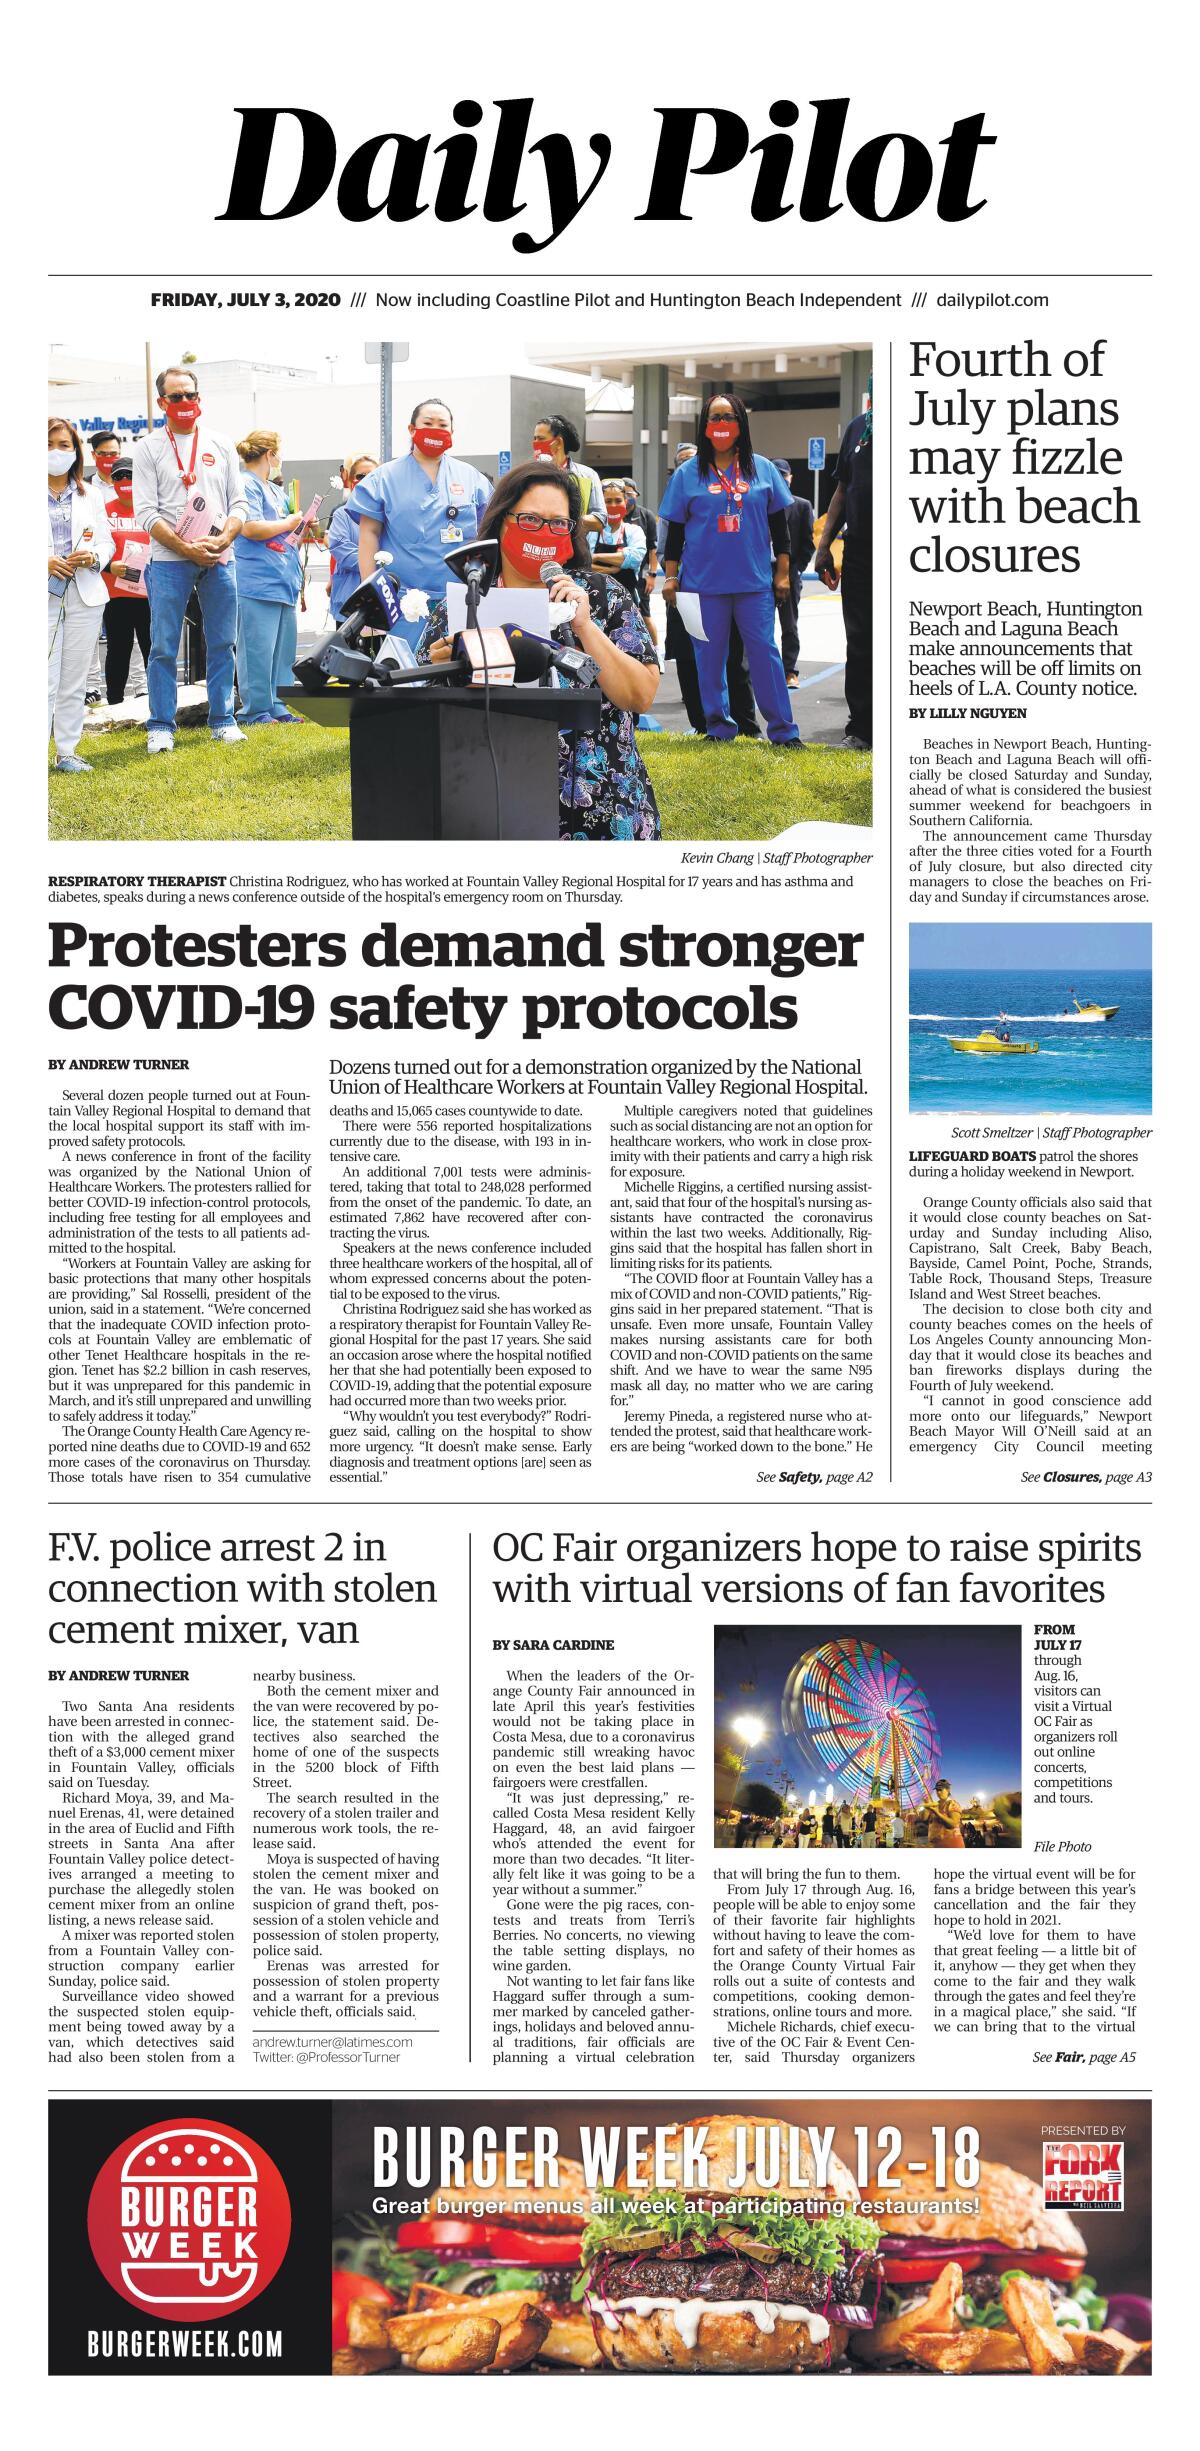 Daily Pilot e-Newspaper: Friday, July 3, 2020 Cover